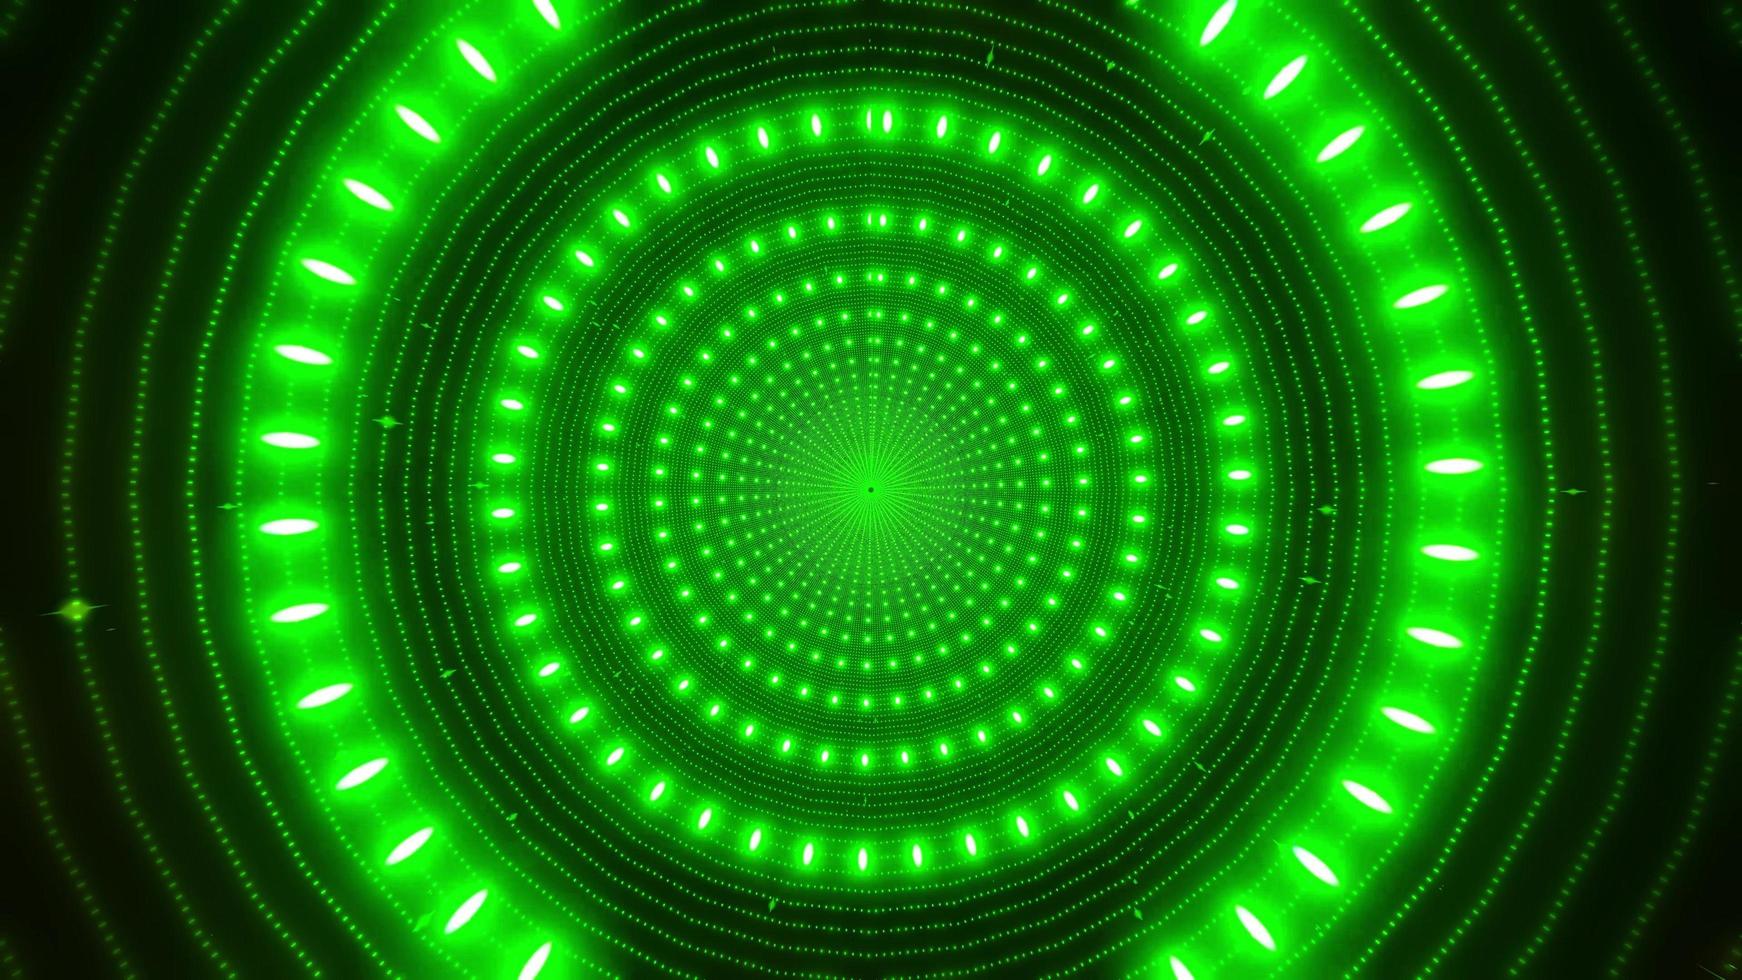 Concentric green circles 3d illustration kaleidoscope design for background or wallpaper photo